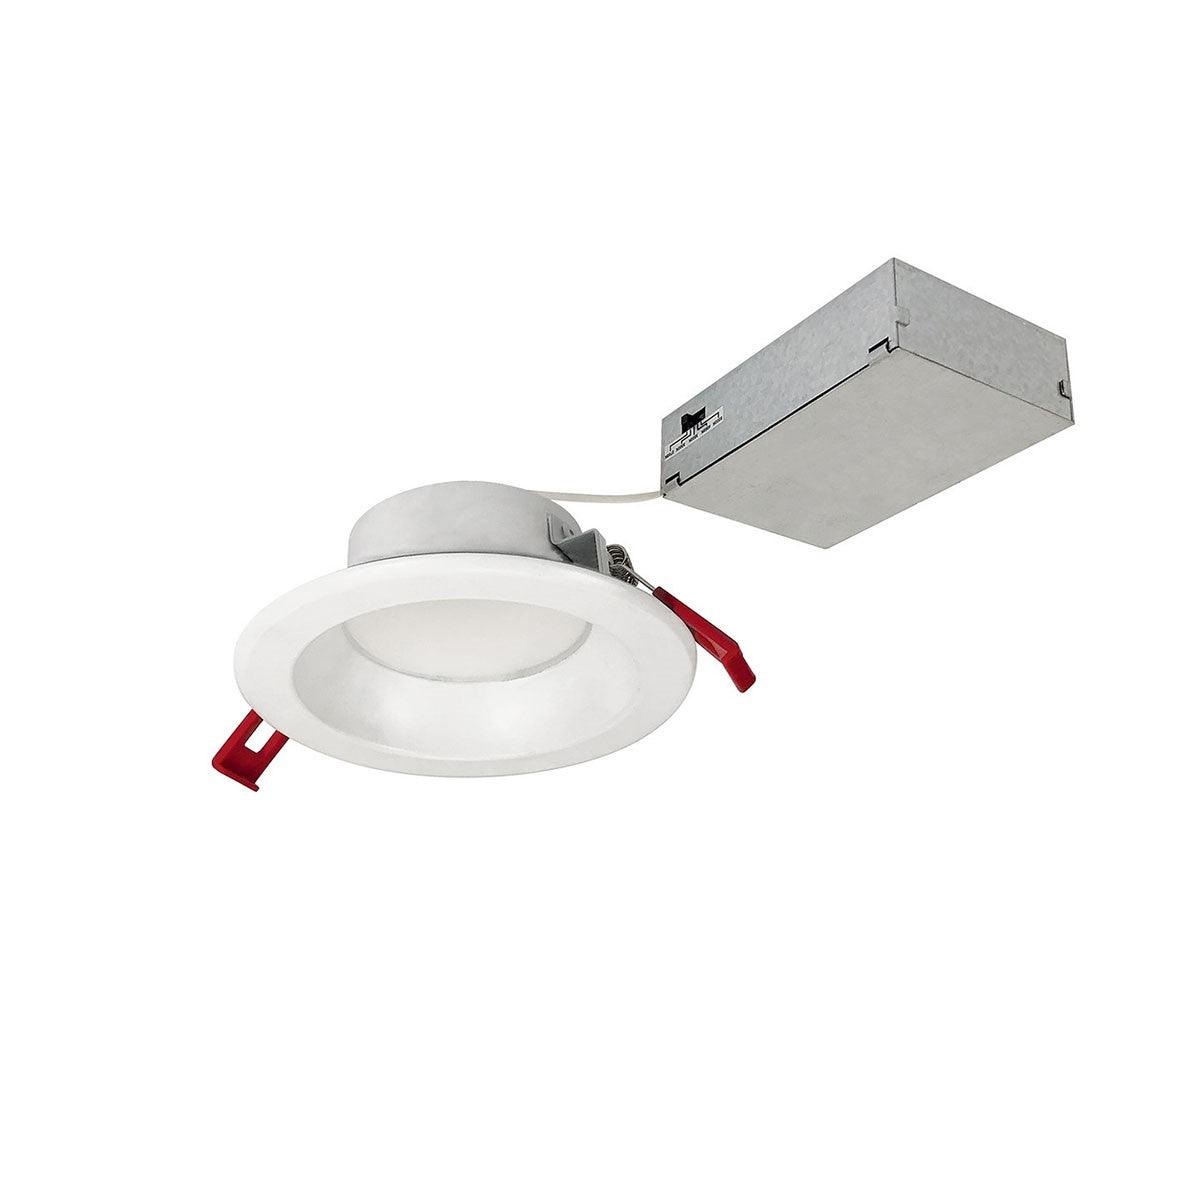 Theia 4 Inch Canless LED Recessed Light, 10 Watt, 950 Lumens, Selectable CCT, 2700K to 5000K, Matte Powder White Finish